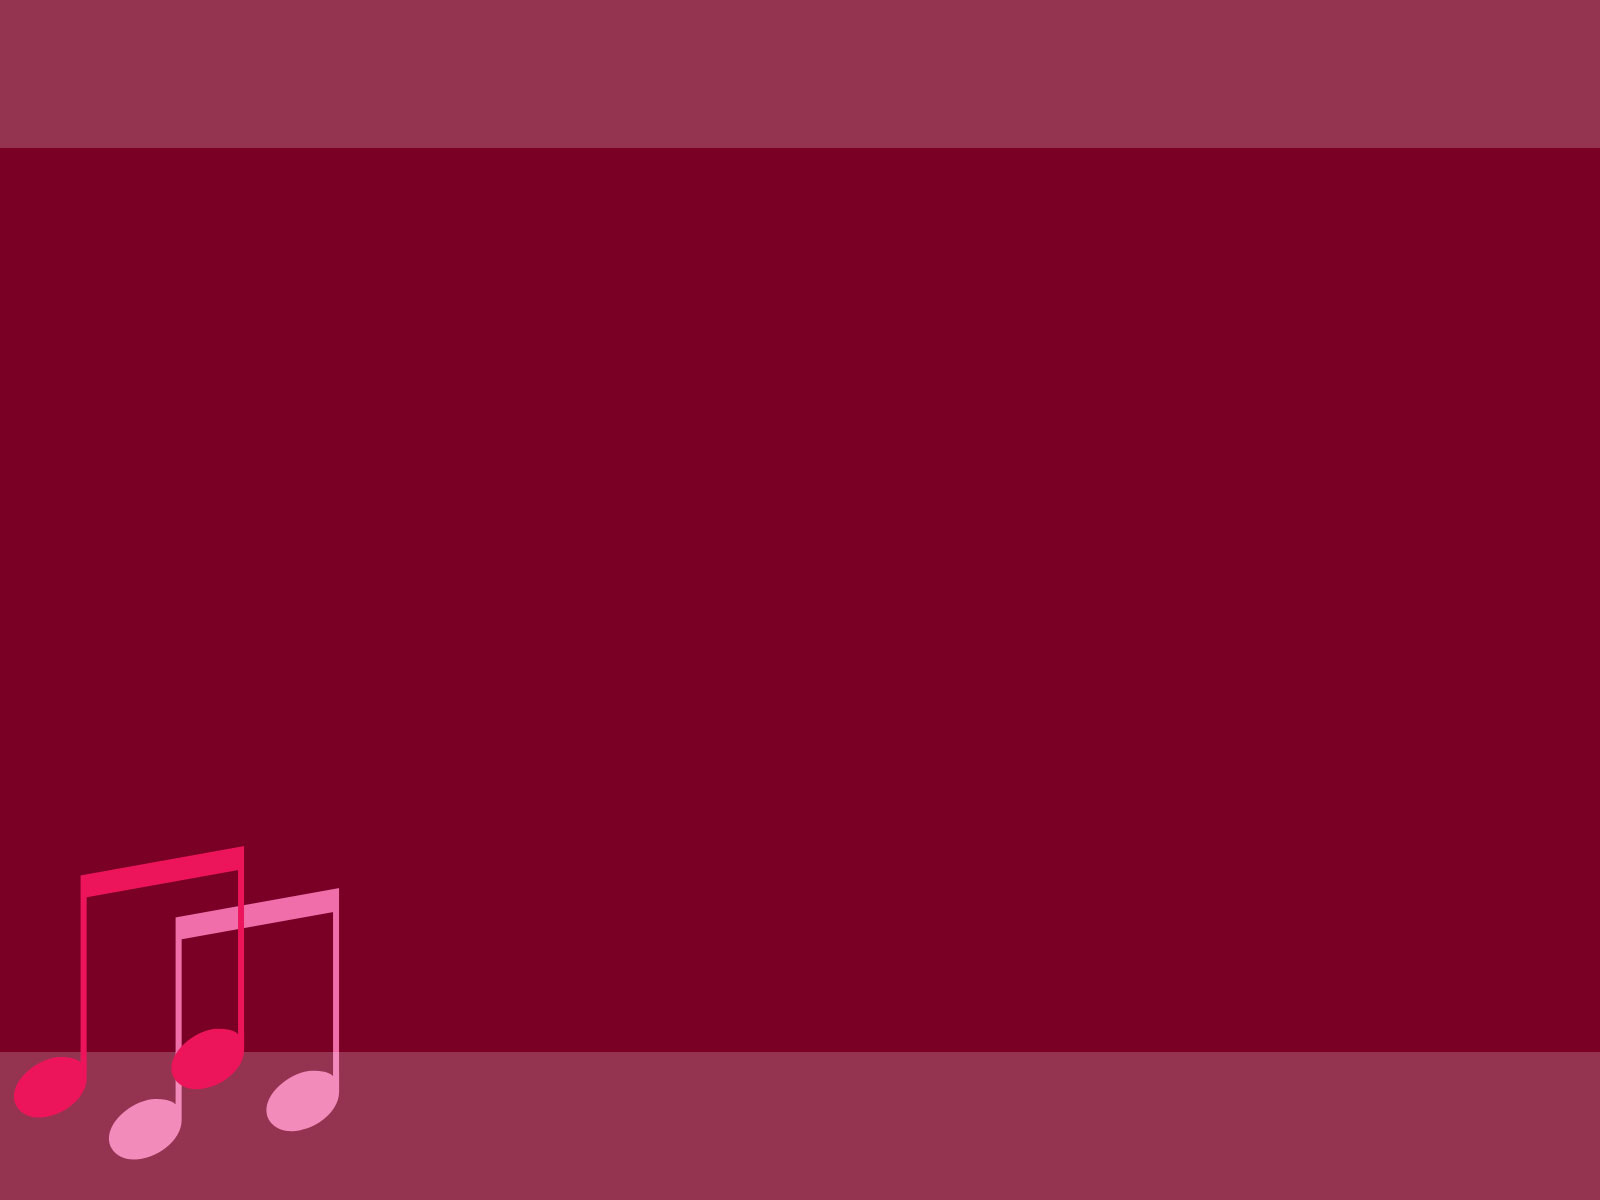 Pink Music Wallpaper Background For Powerpoint HD